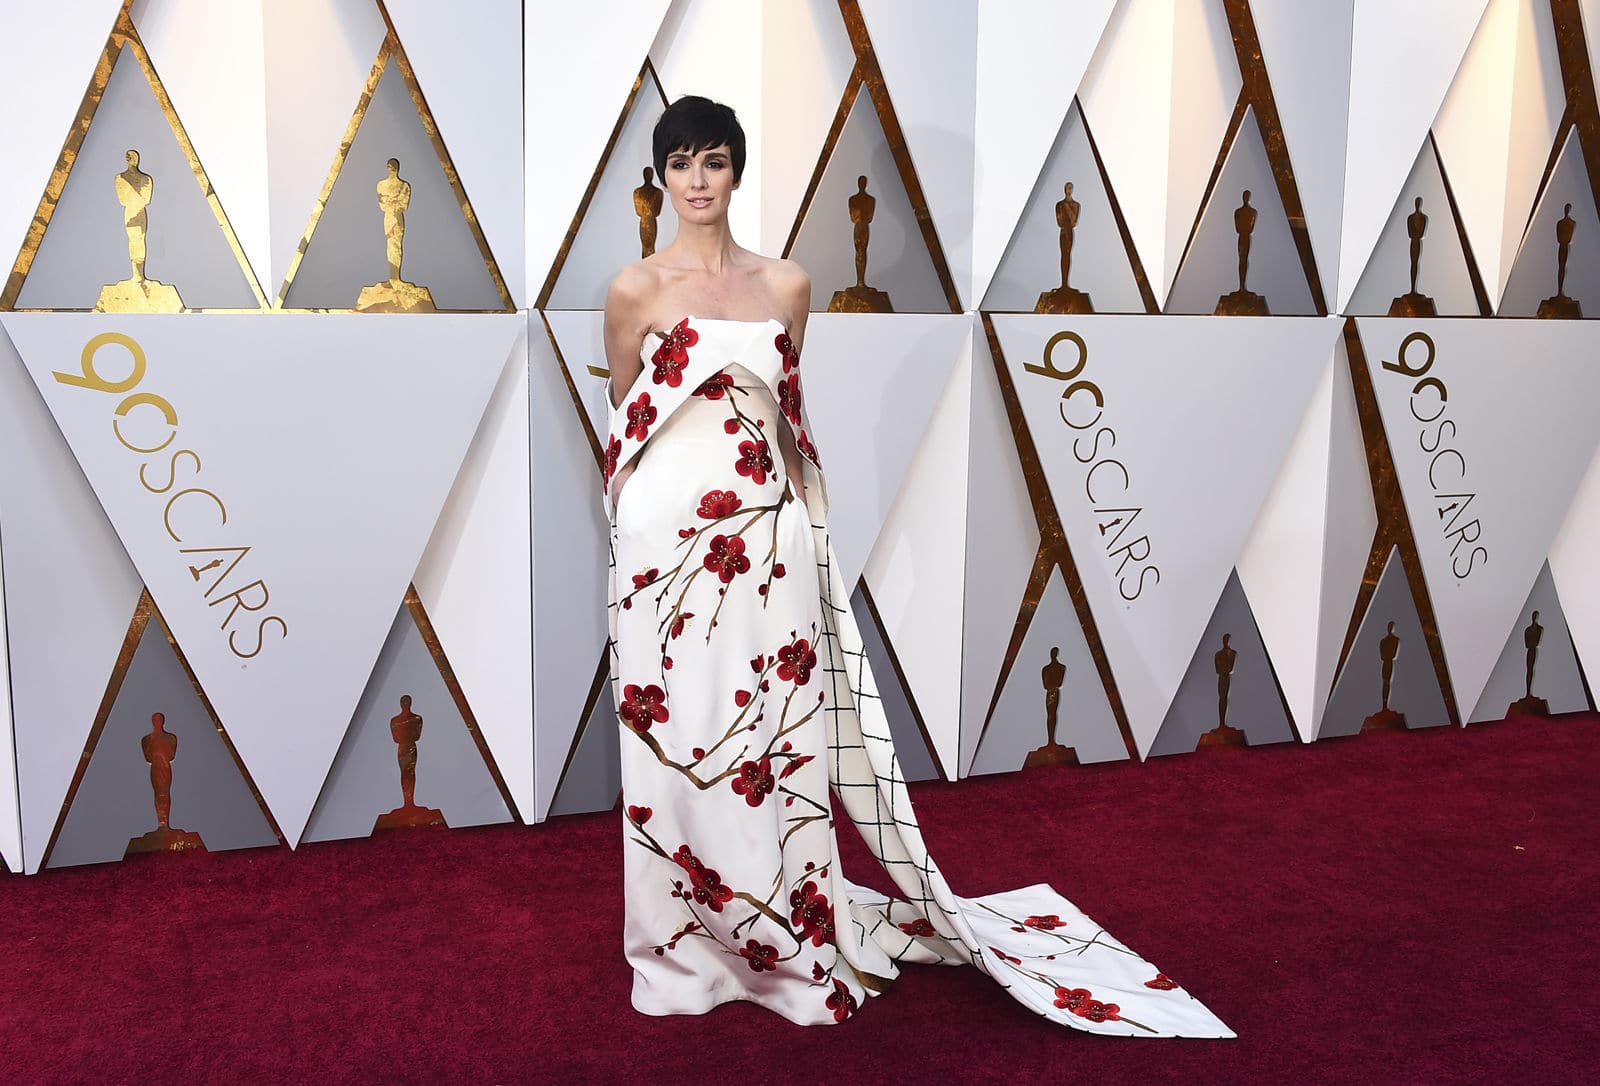 Paz Vega arrives at the Oscars on Sunday, March 4, 2018, at the Dolby Theatre in Los Angeles. (Photo by Jordan Strauss/Invision/AP)